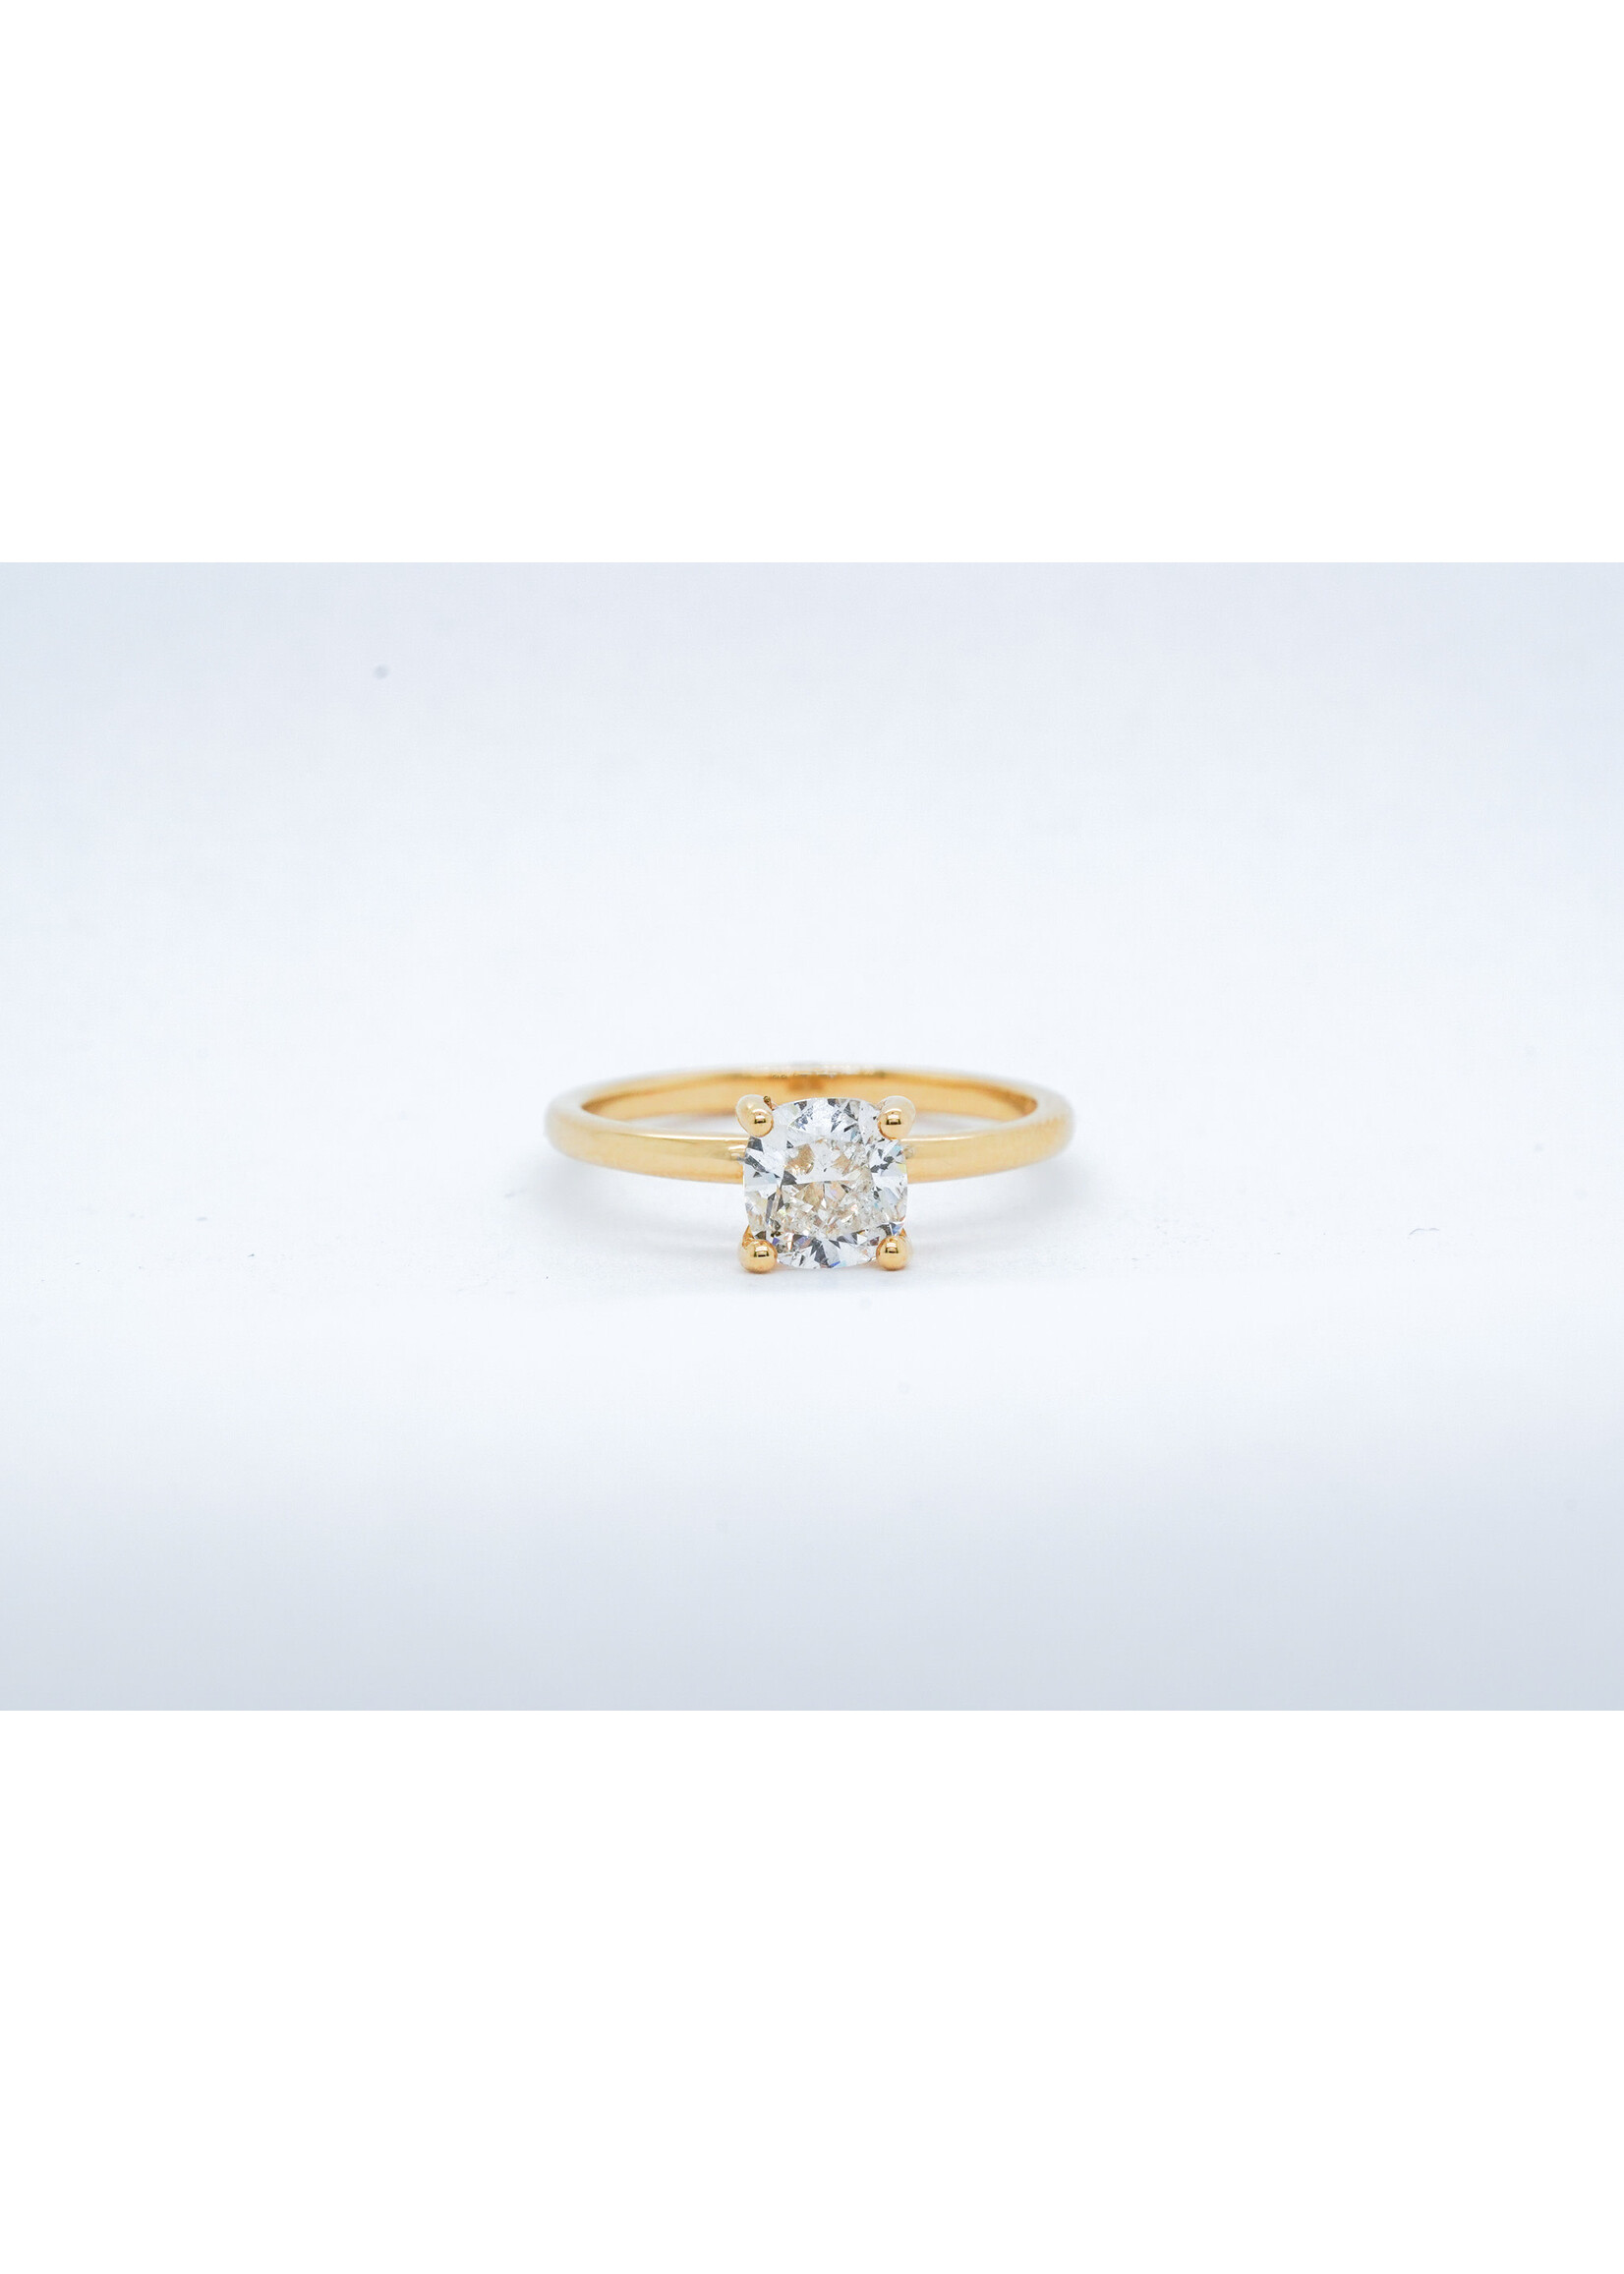 14KY 2.65g 1.28ct H/SI2 Cushion Diamond Solitaire Engagement Ring (size 7)